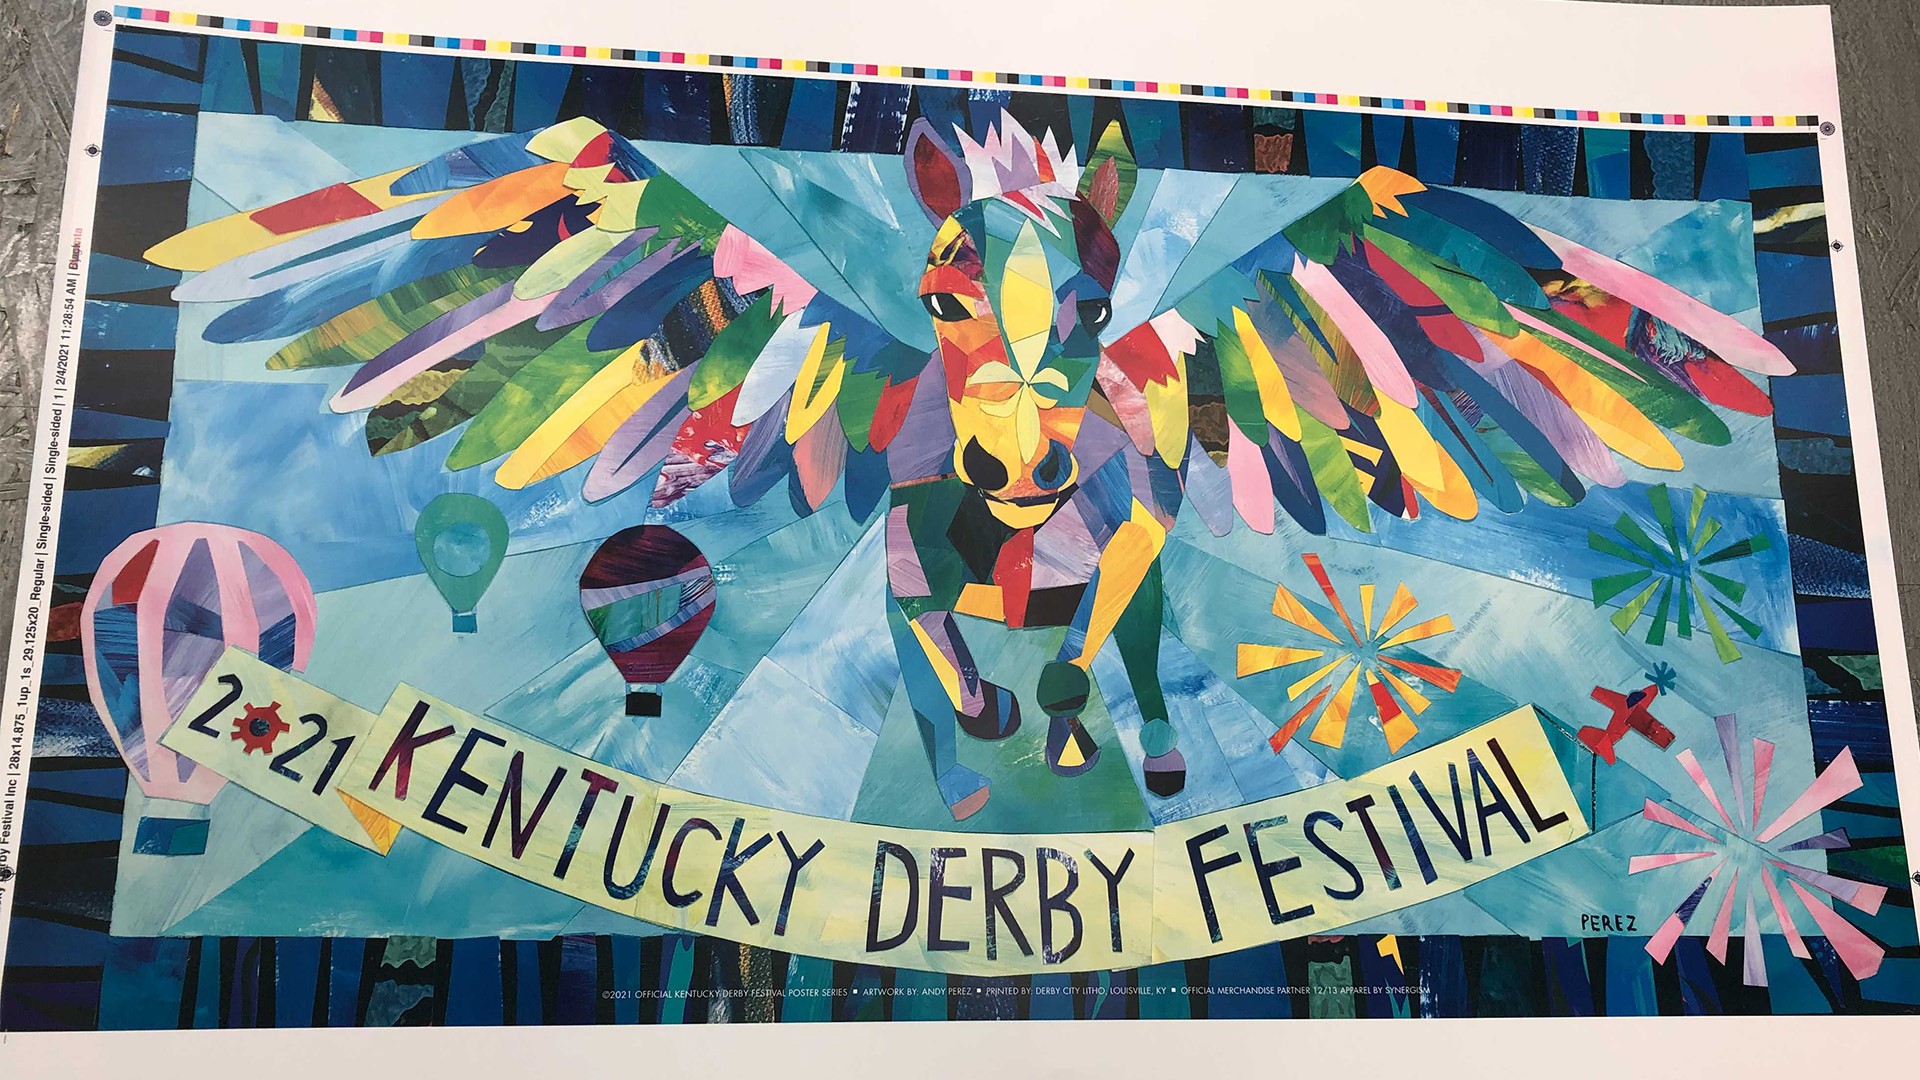 The poster, created by Louisville artist Andy Perez, is a collage of nine previous Derby Festival posters.